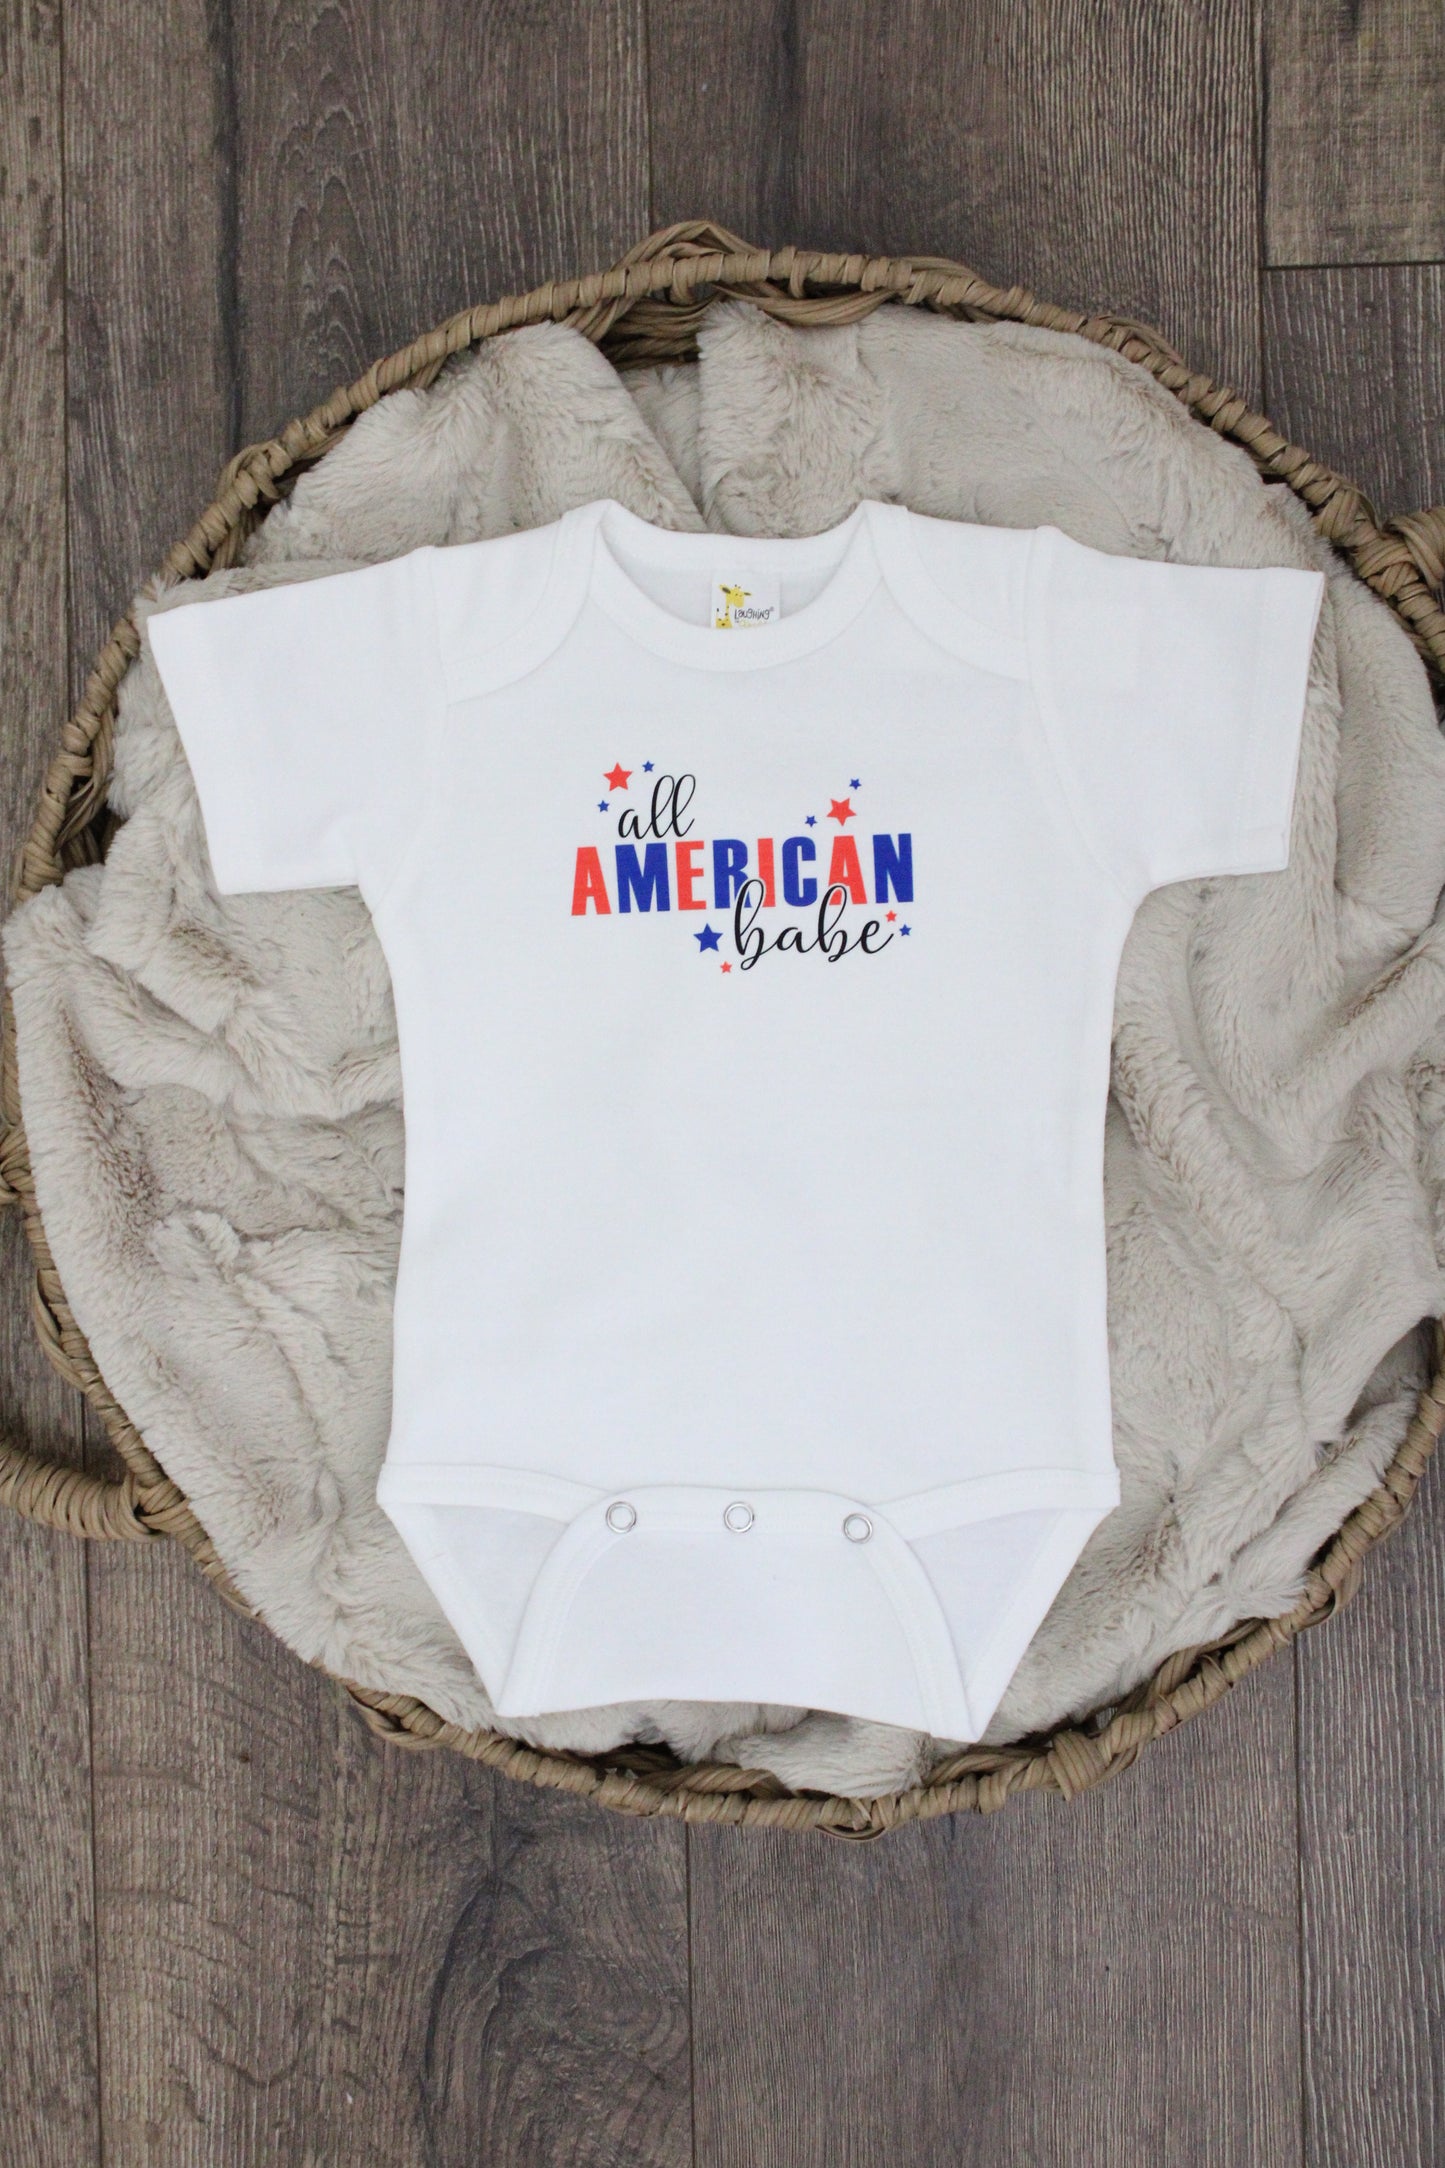 All American Babe Bodysuit or T-Shirt